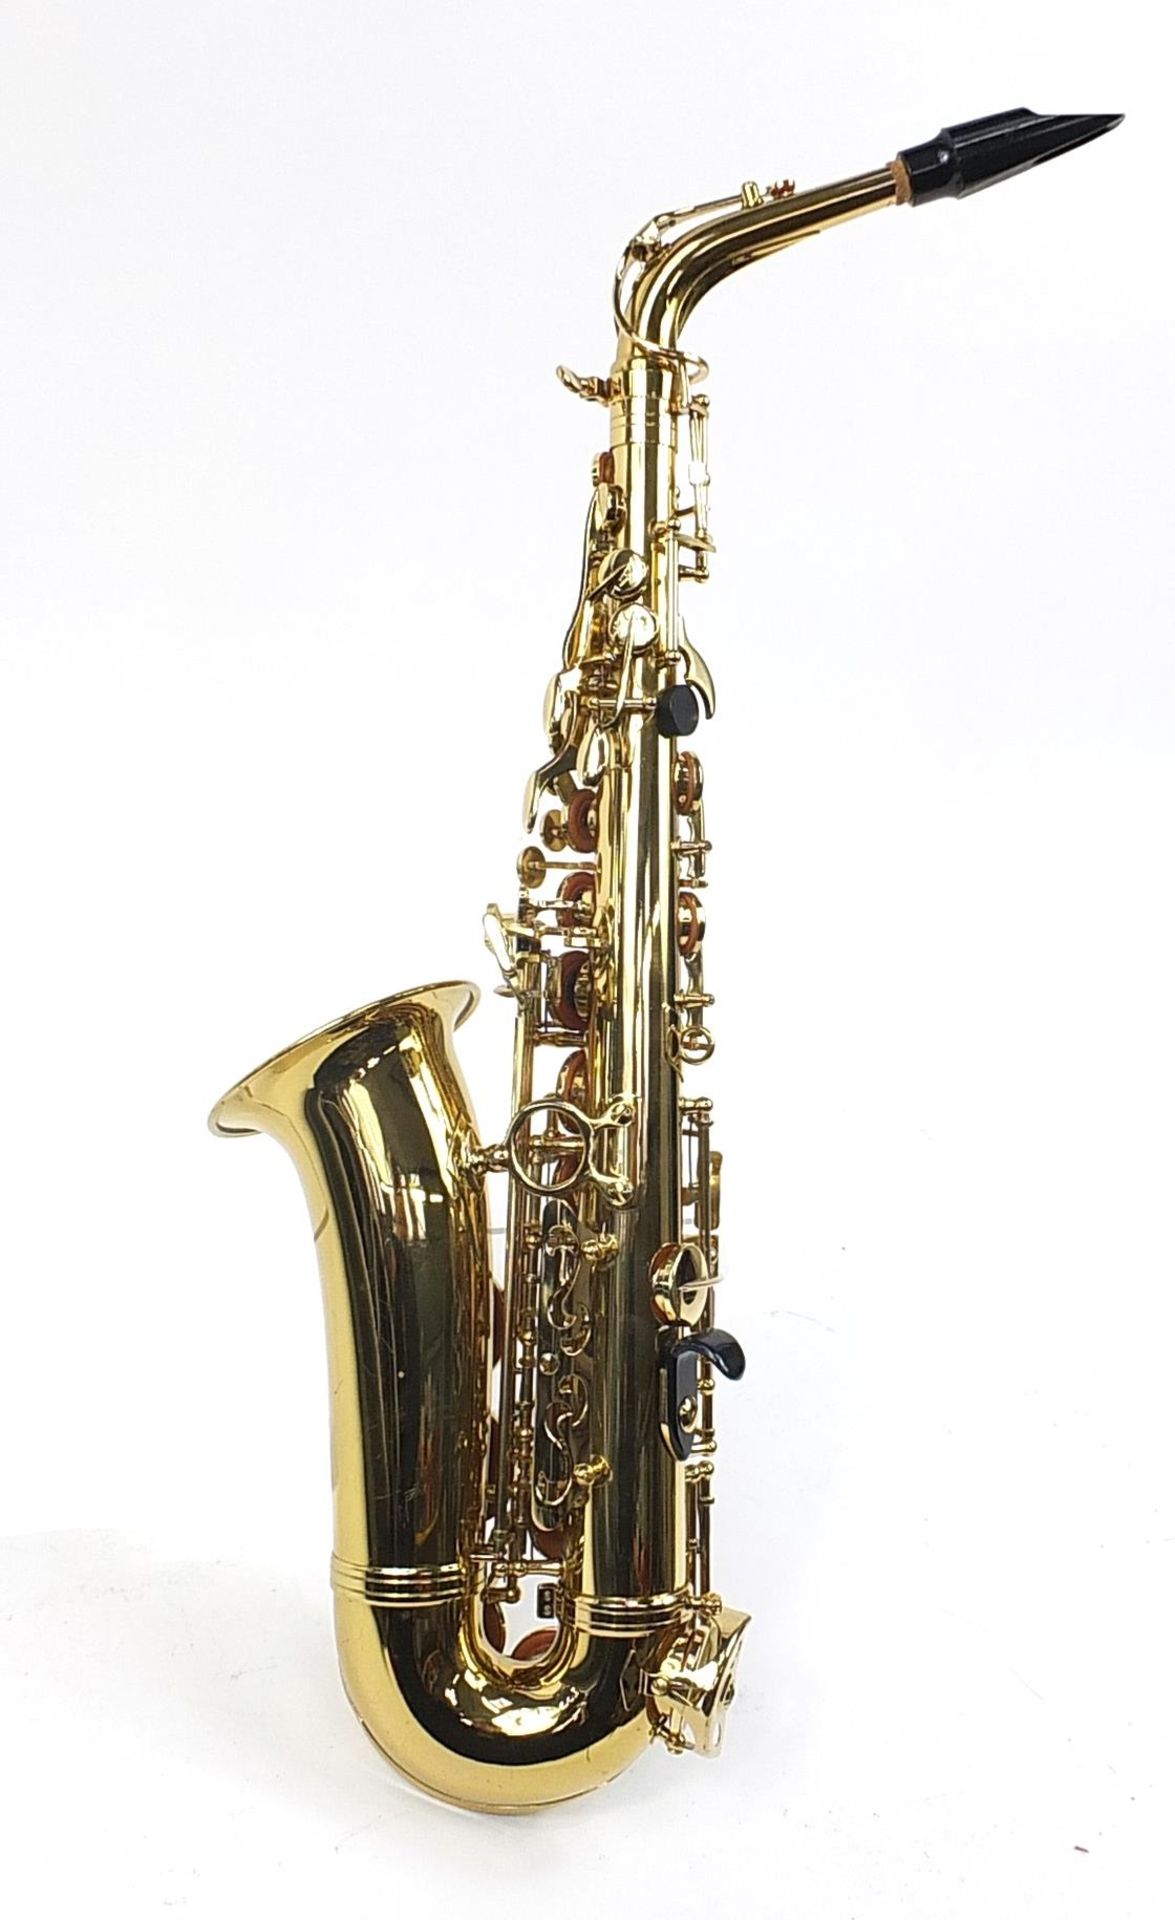 Artemis MKII brass saxophone numbered 0106449, housed in a fitted case - Image 4 of 6